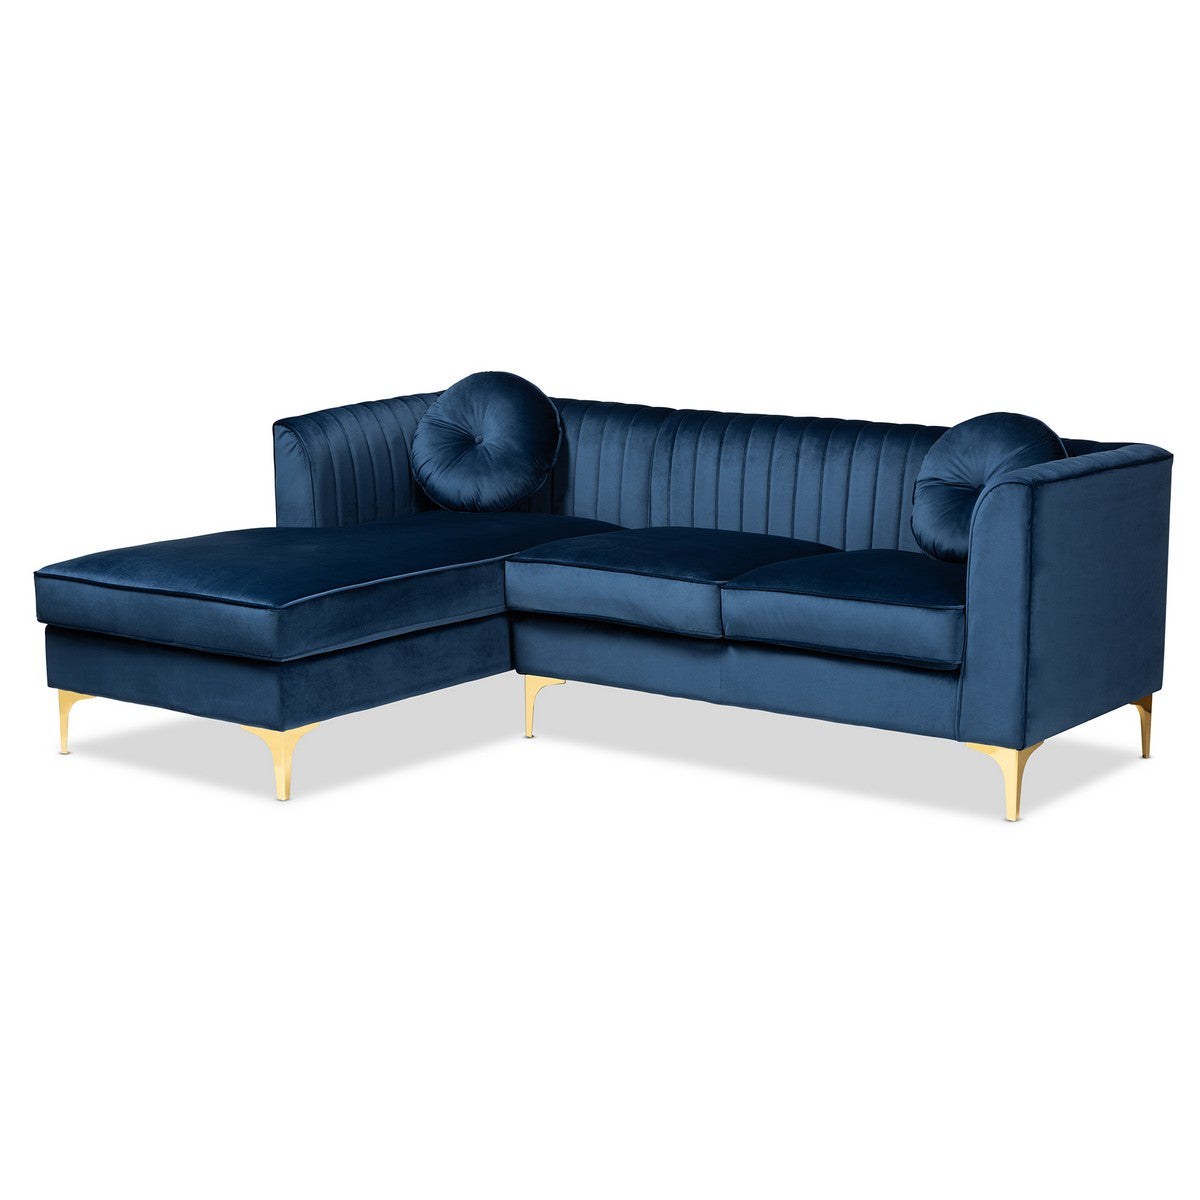 Baxton Studio Giselle Glam and Luxe Navy Blue Velvet Fabric Upholstered Mirrored Gold Finished Left Facing Sectional Sofa with Chaise Baxton Studio- Sectional Sofas-Minimal And Modern - 1